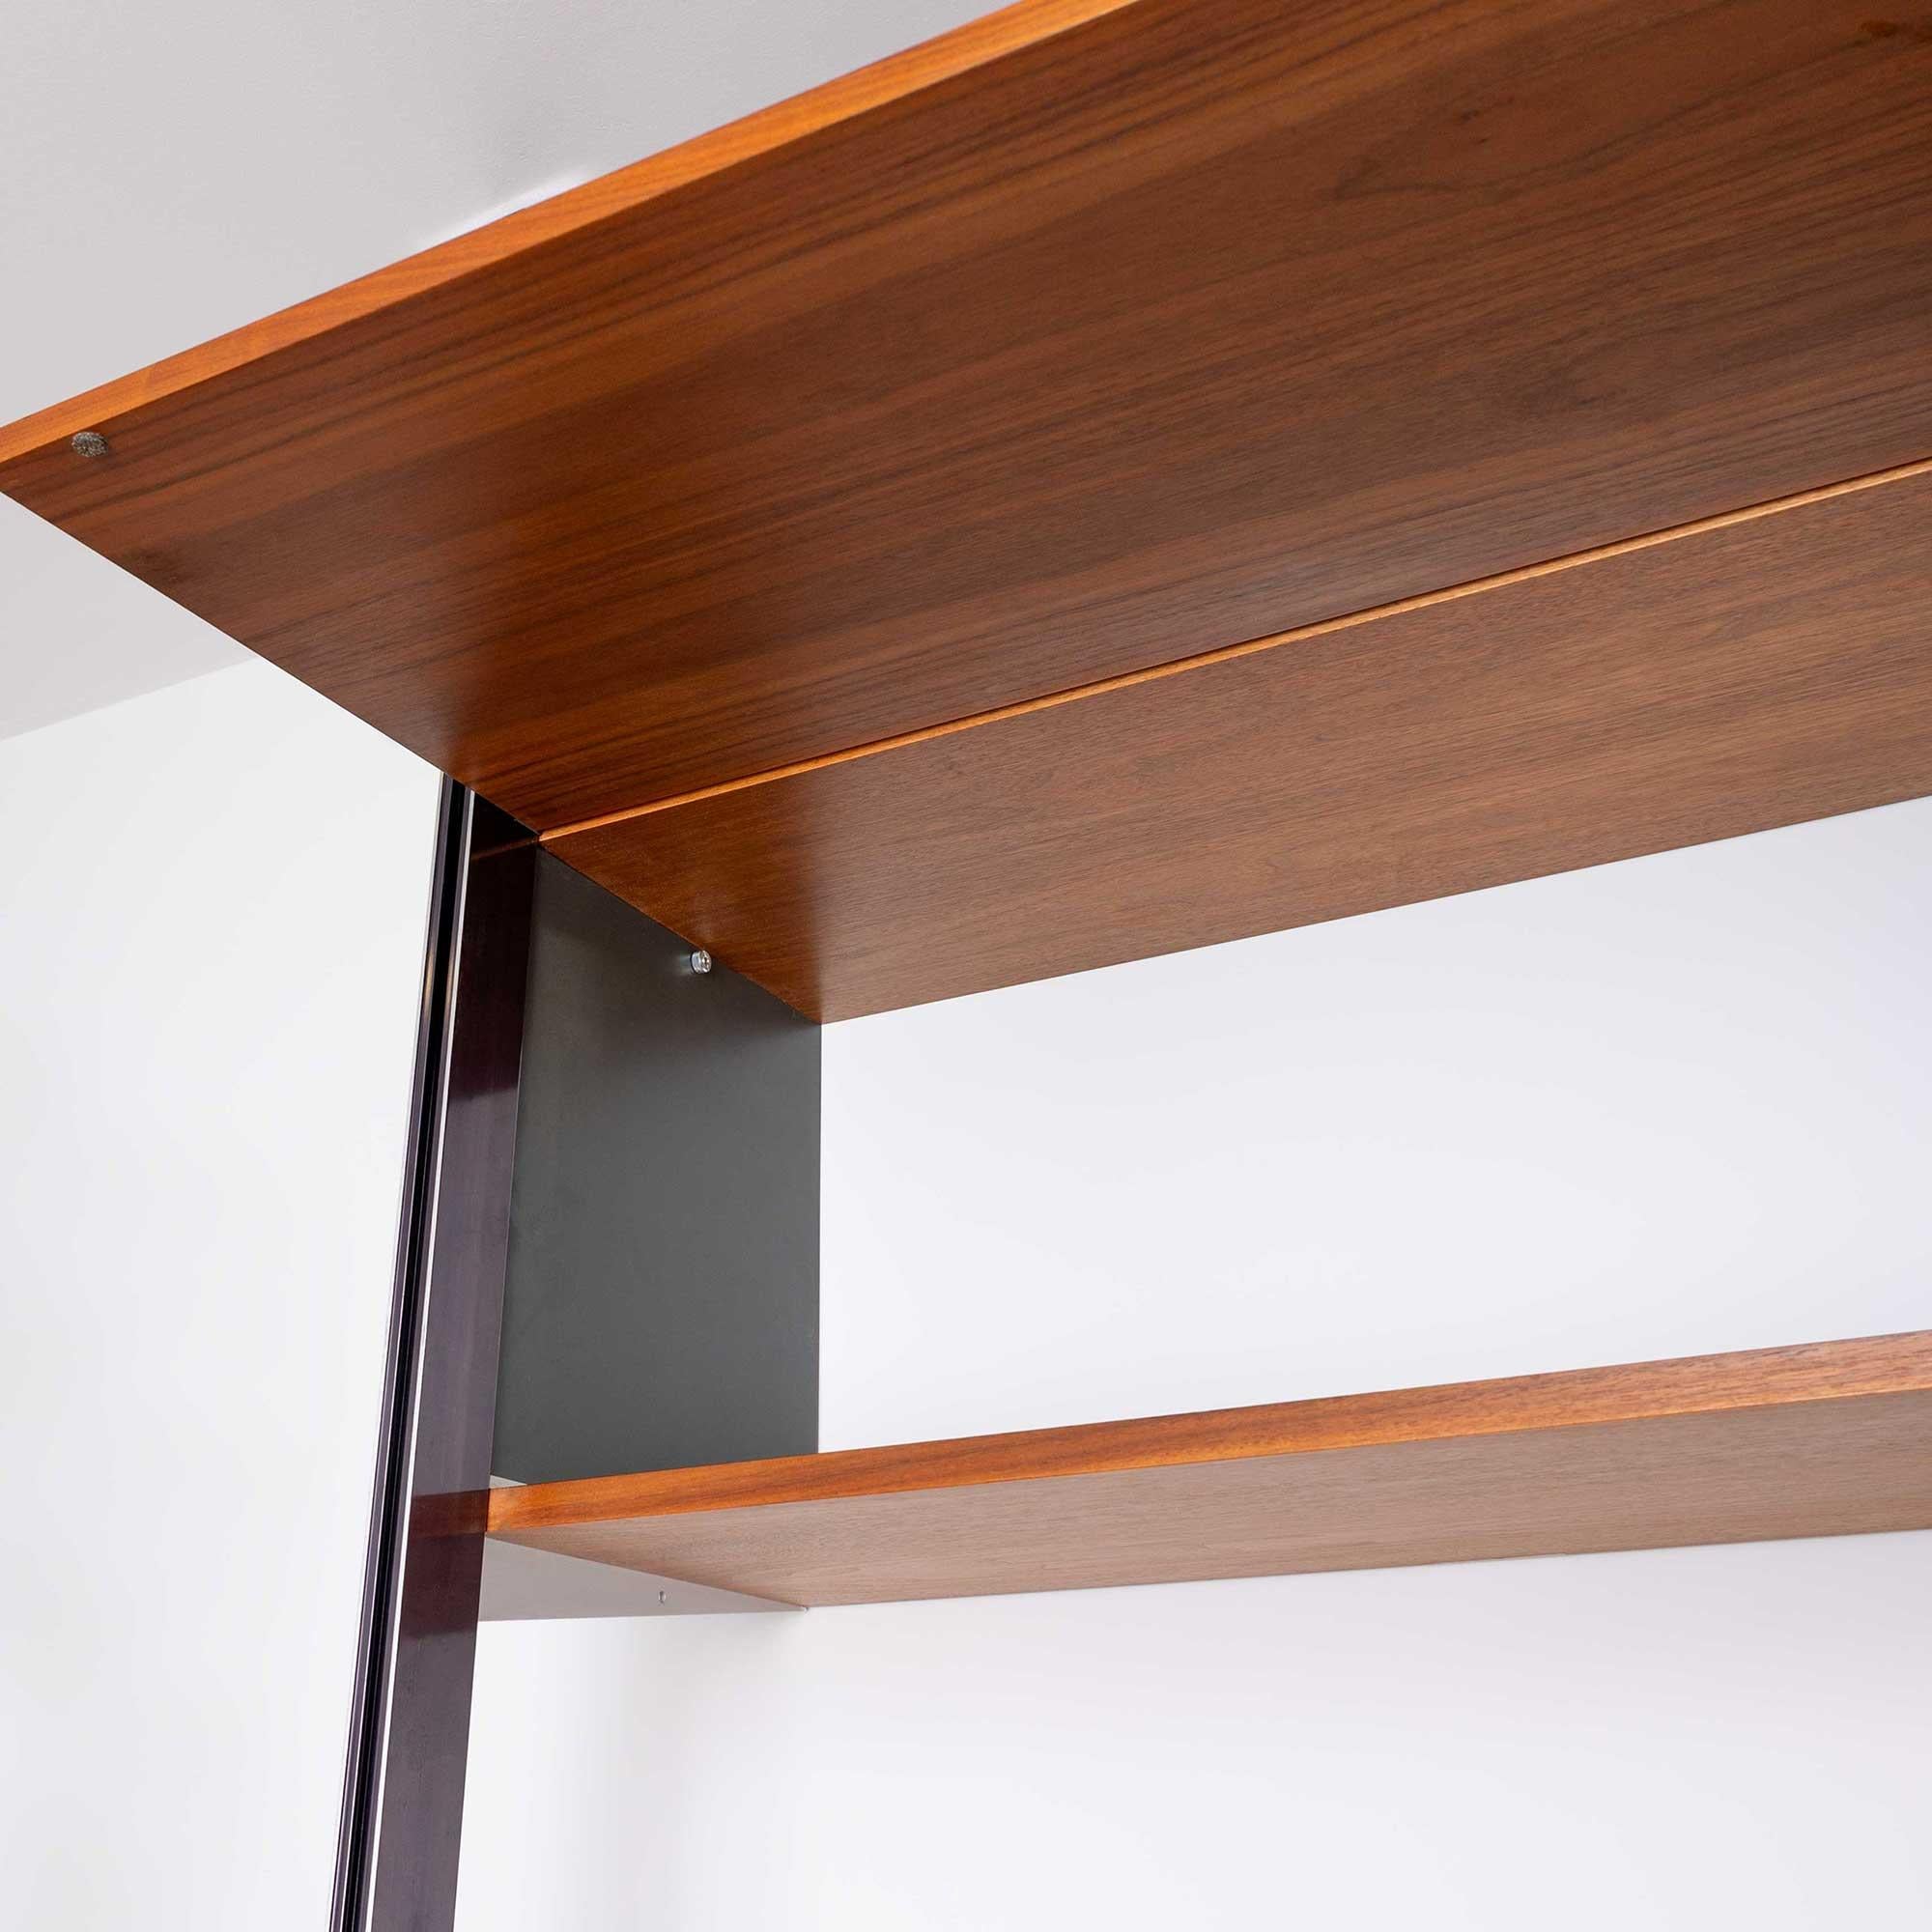 American George Nelson CSS Book Shelve System Circa 1960s for Herman Miller For Sale